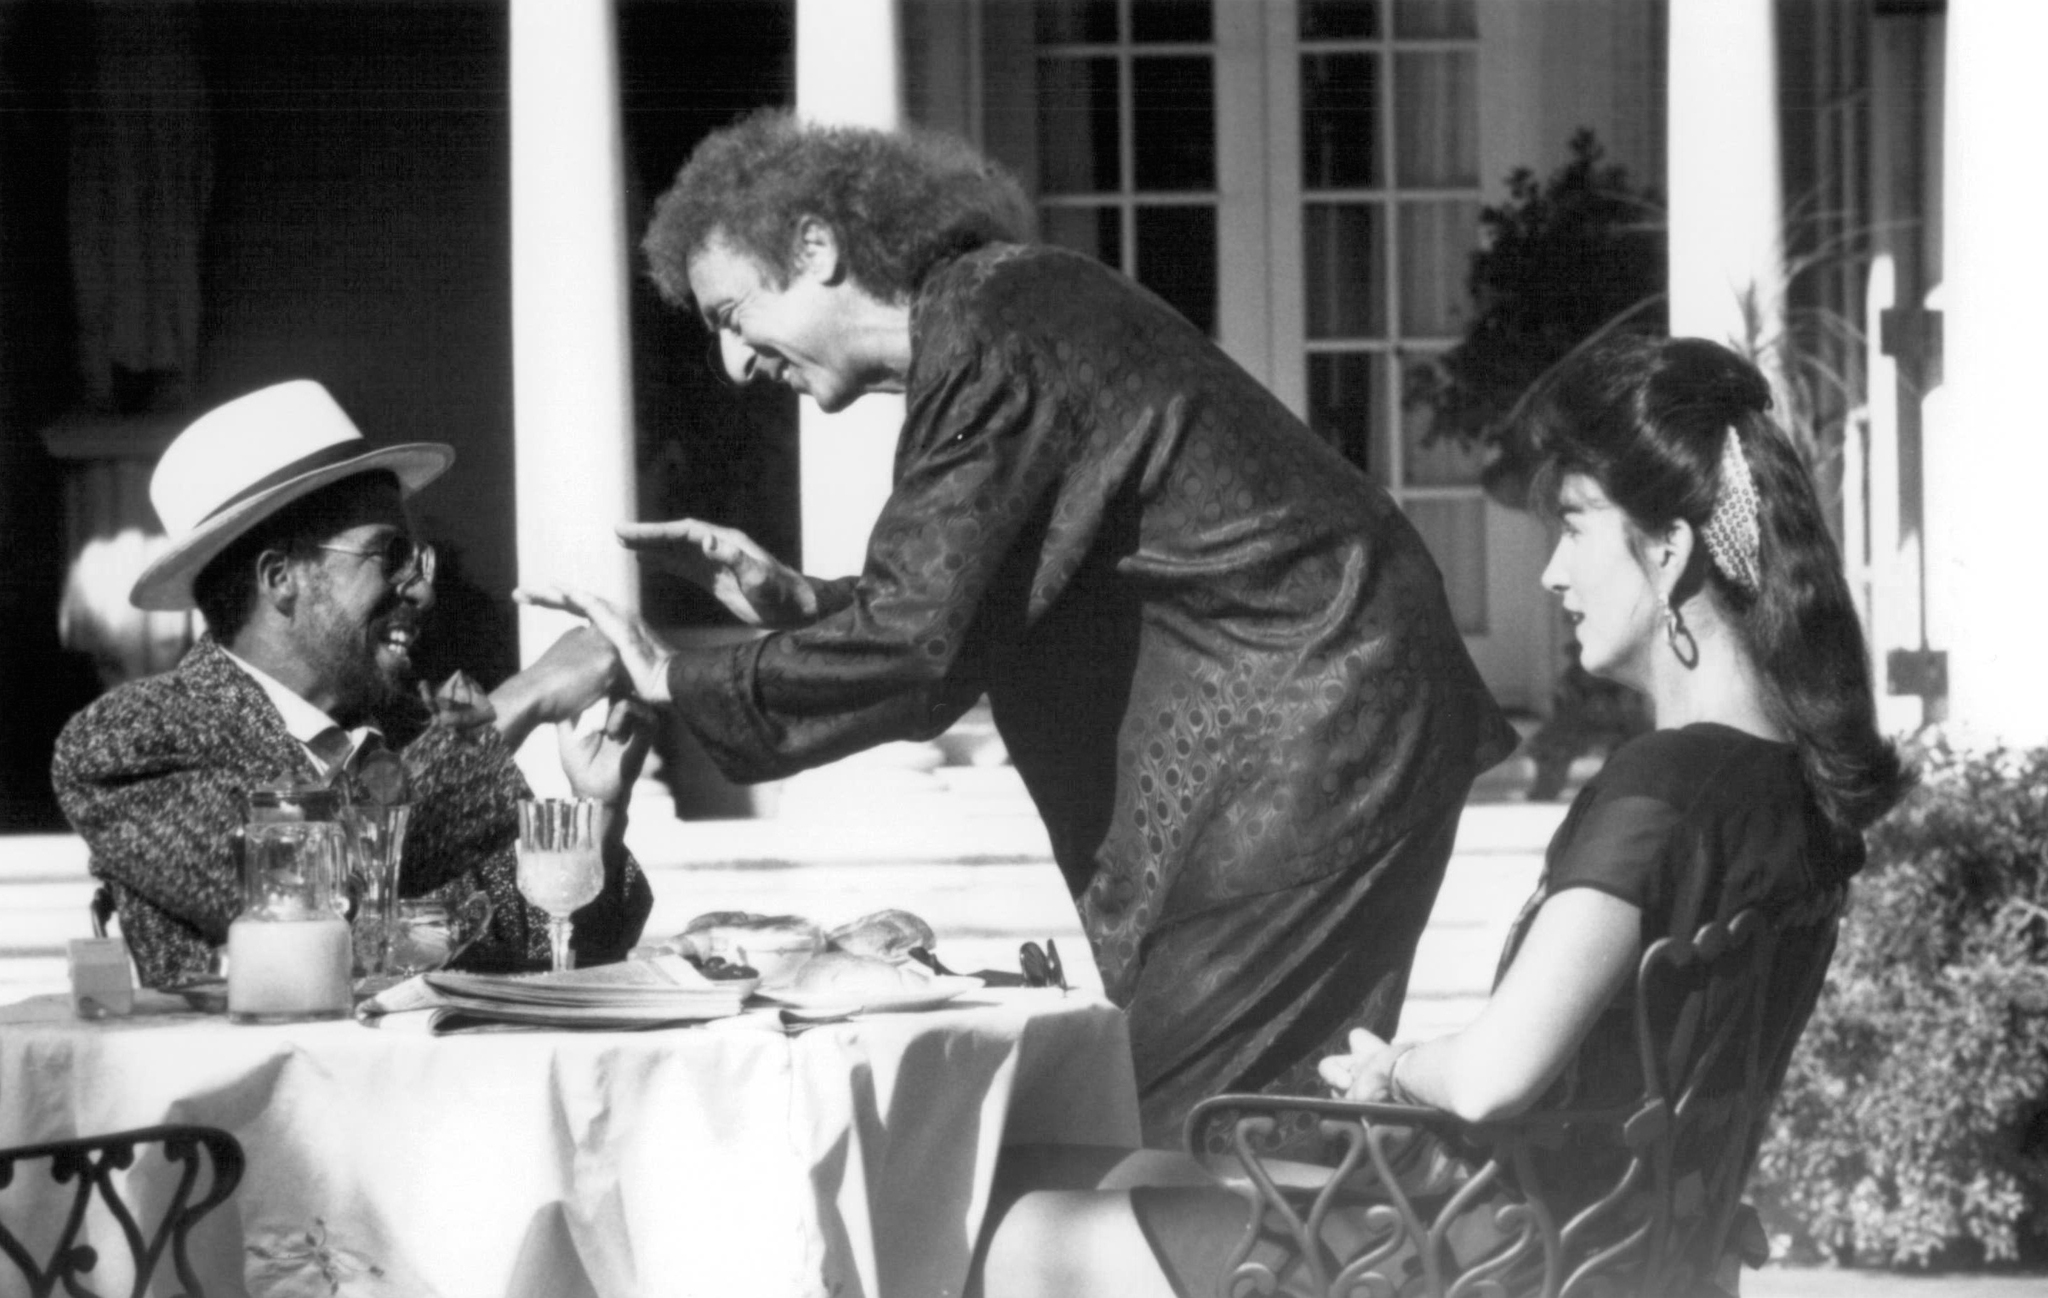 Still of Gene Wilder, Richard Pryor and Mercedes Ruehl in Another You (1991)